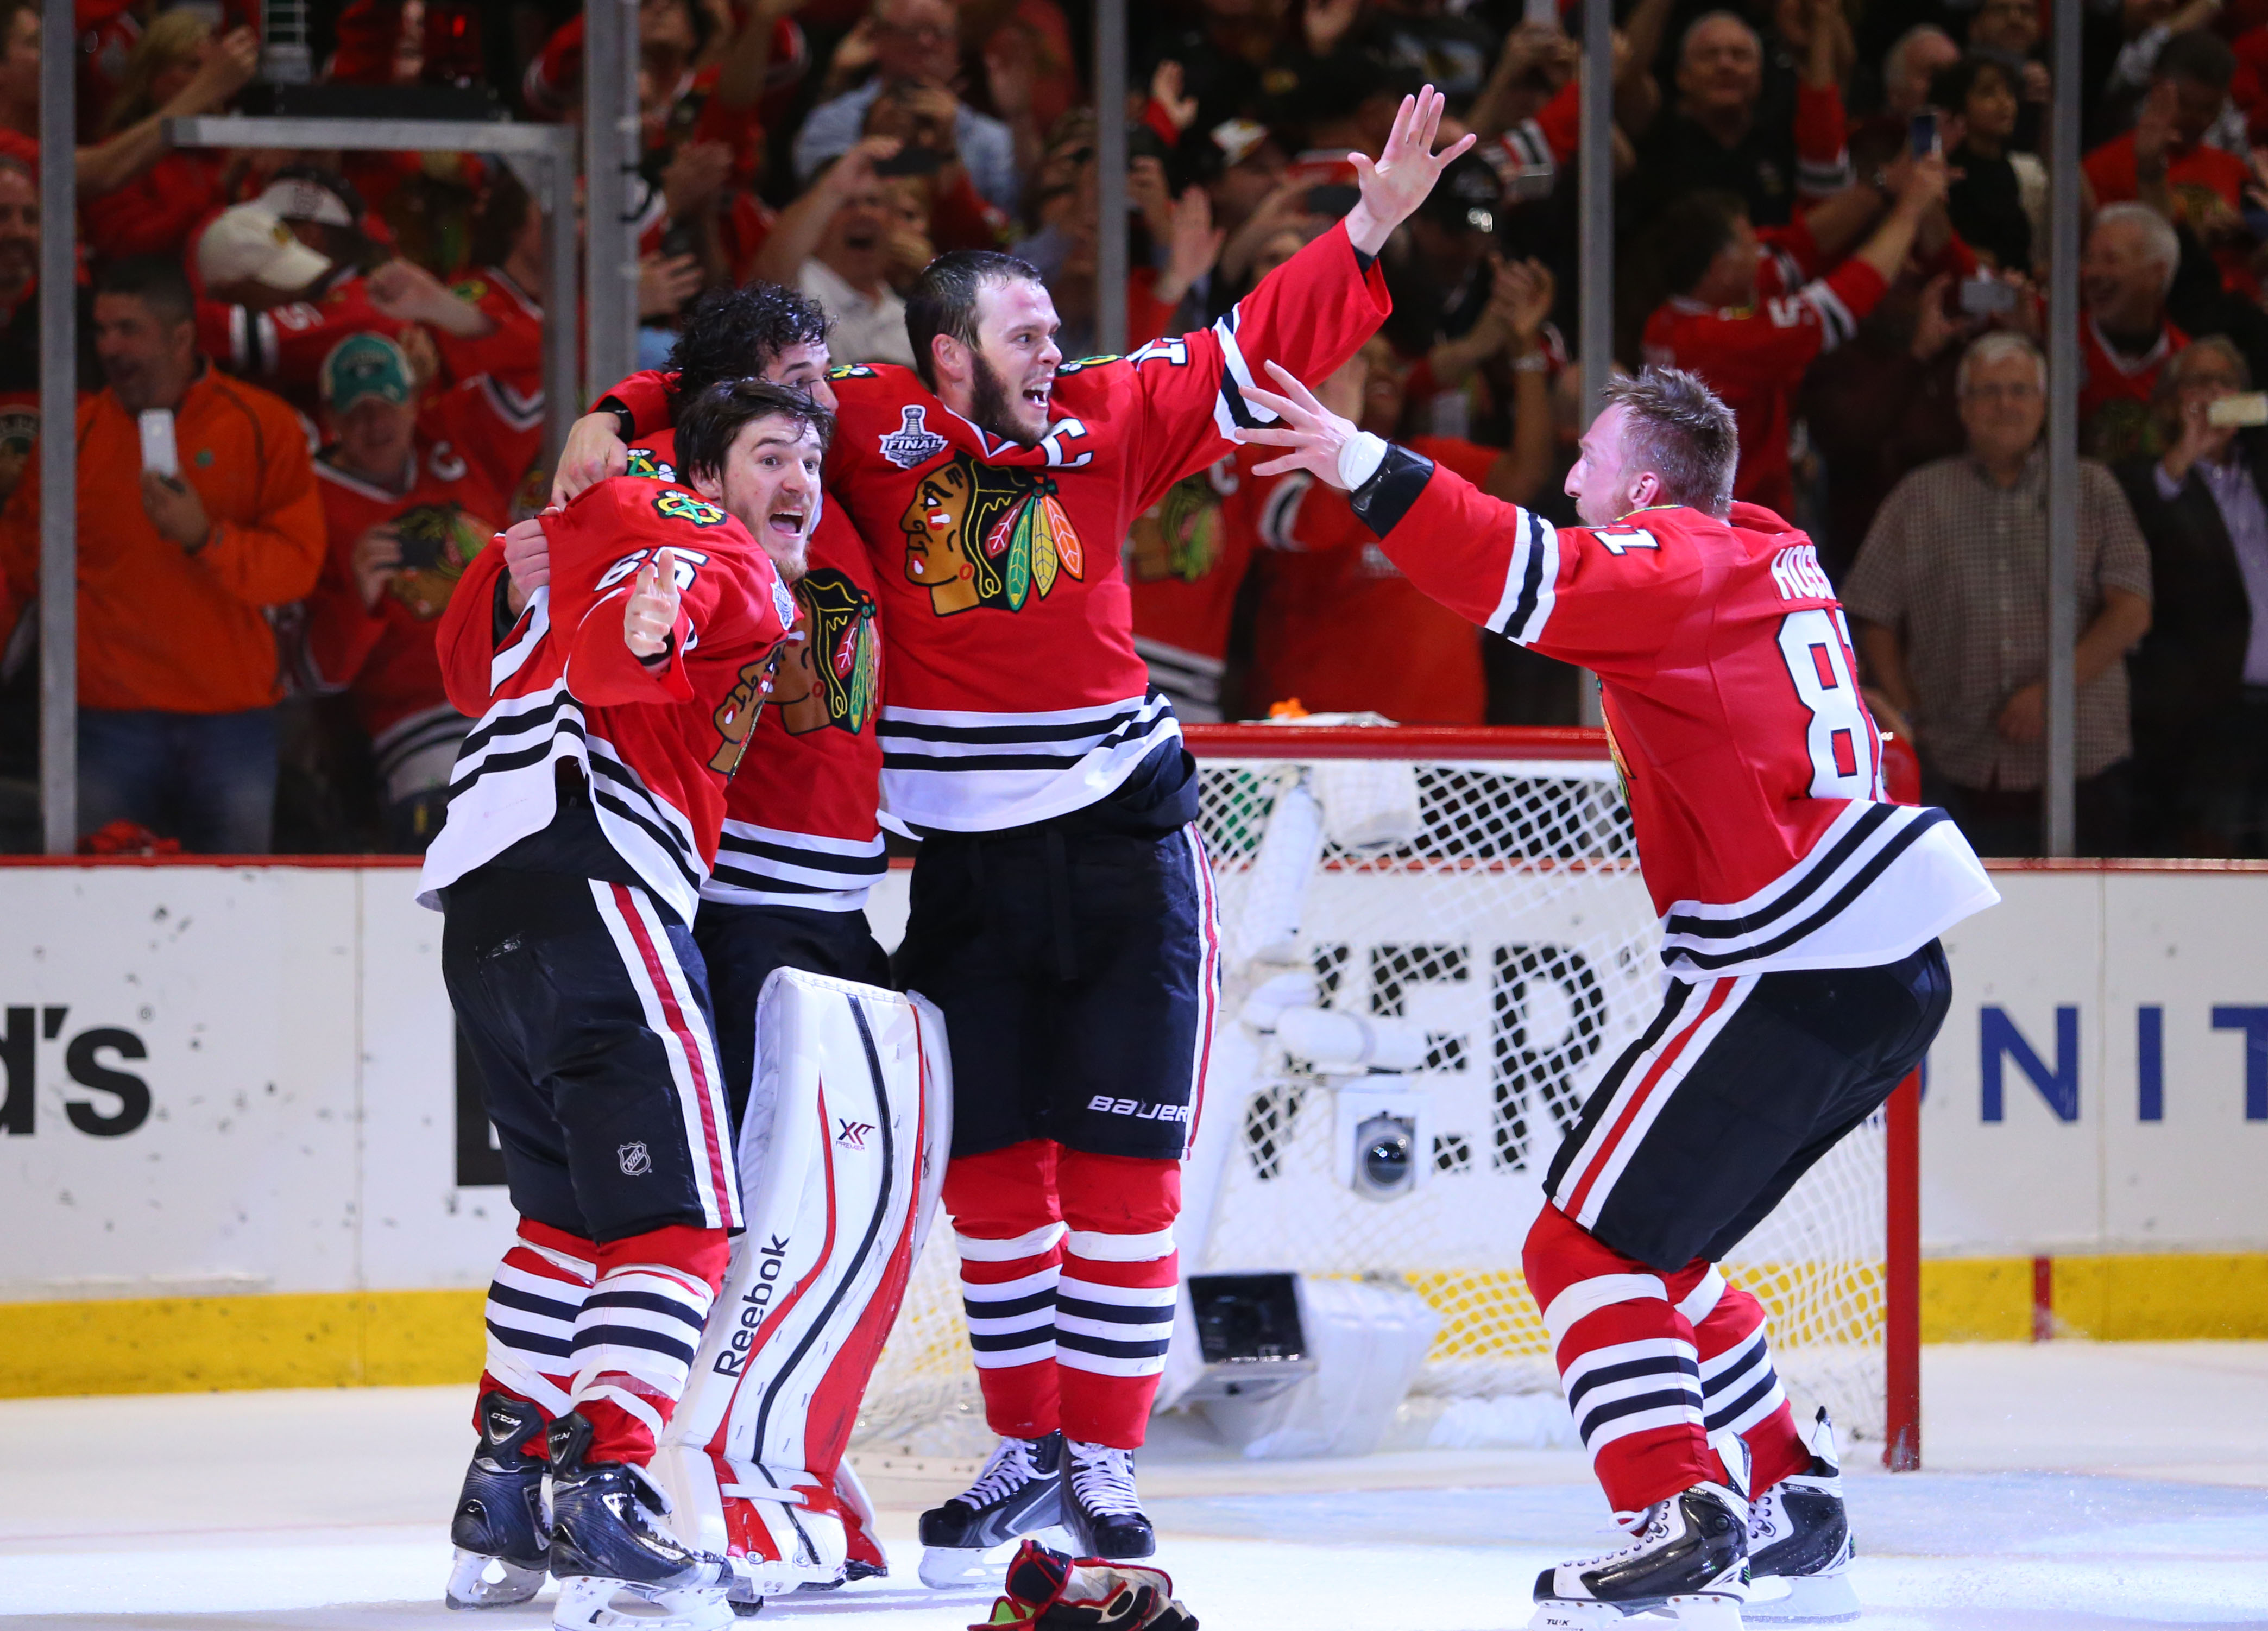 Blackhawks win Stanley Cup at home for first time in 77 years